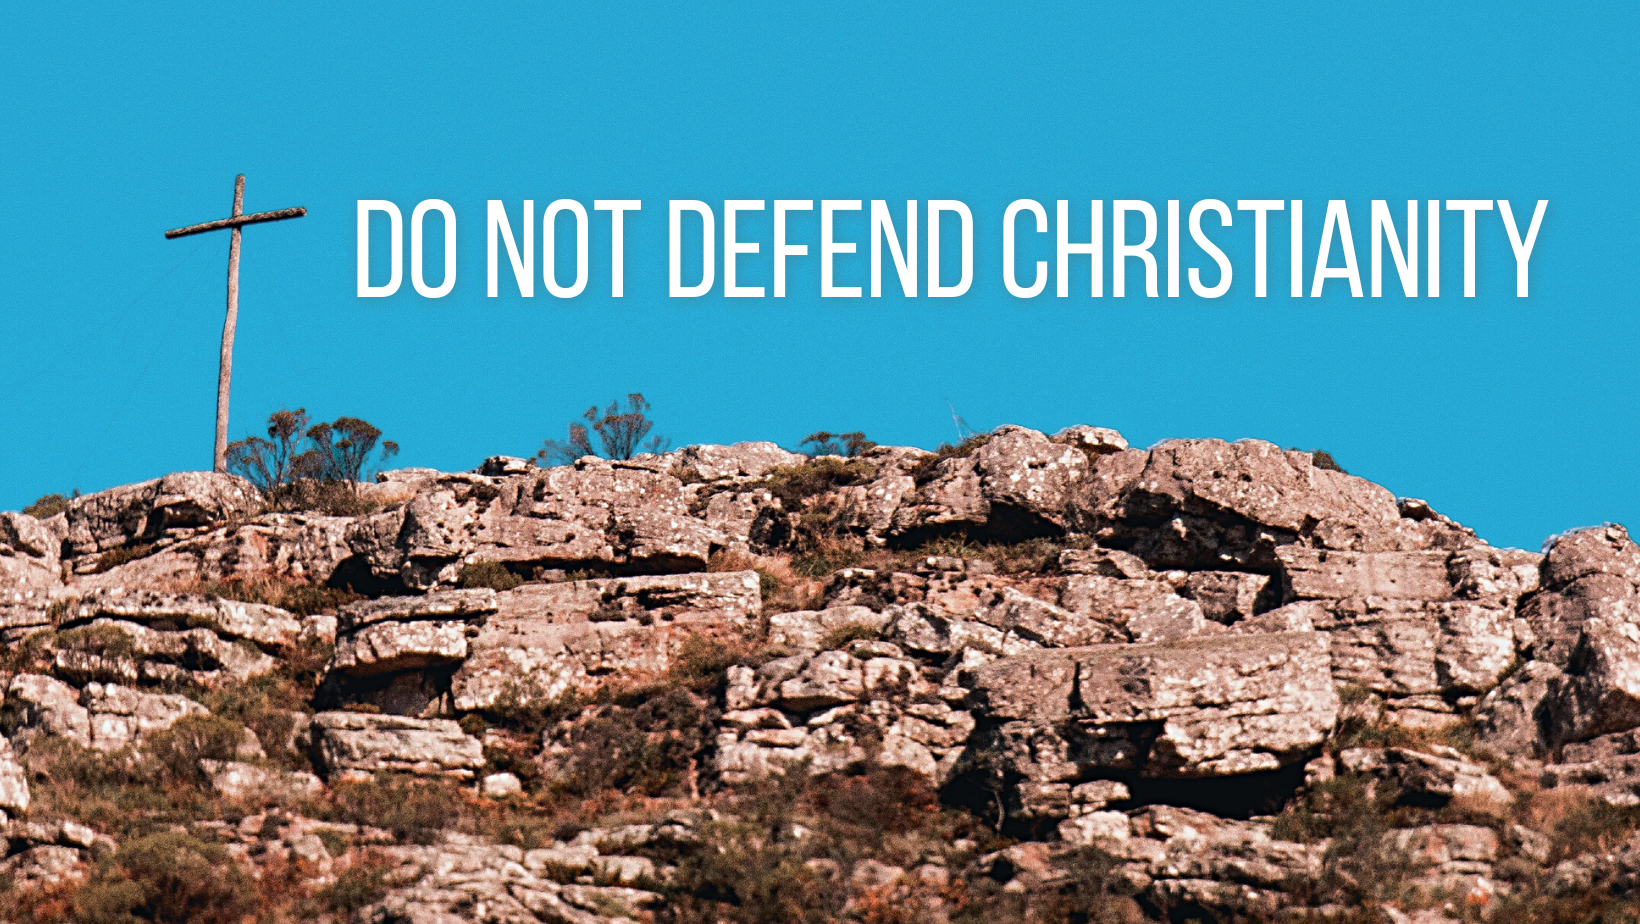 Do not defend Christianity